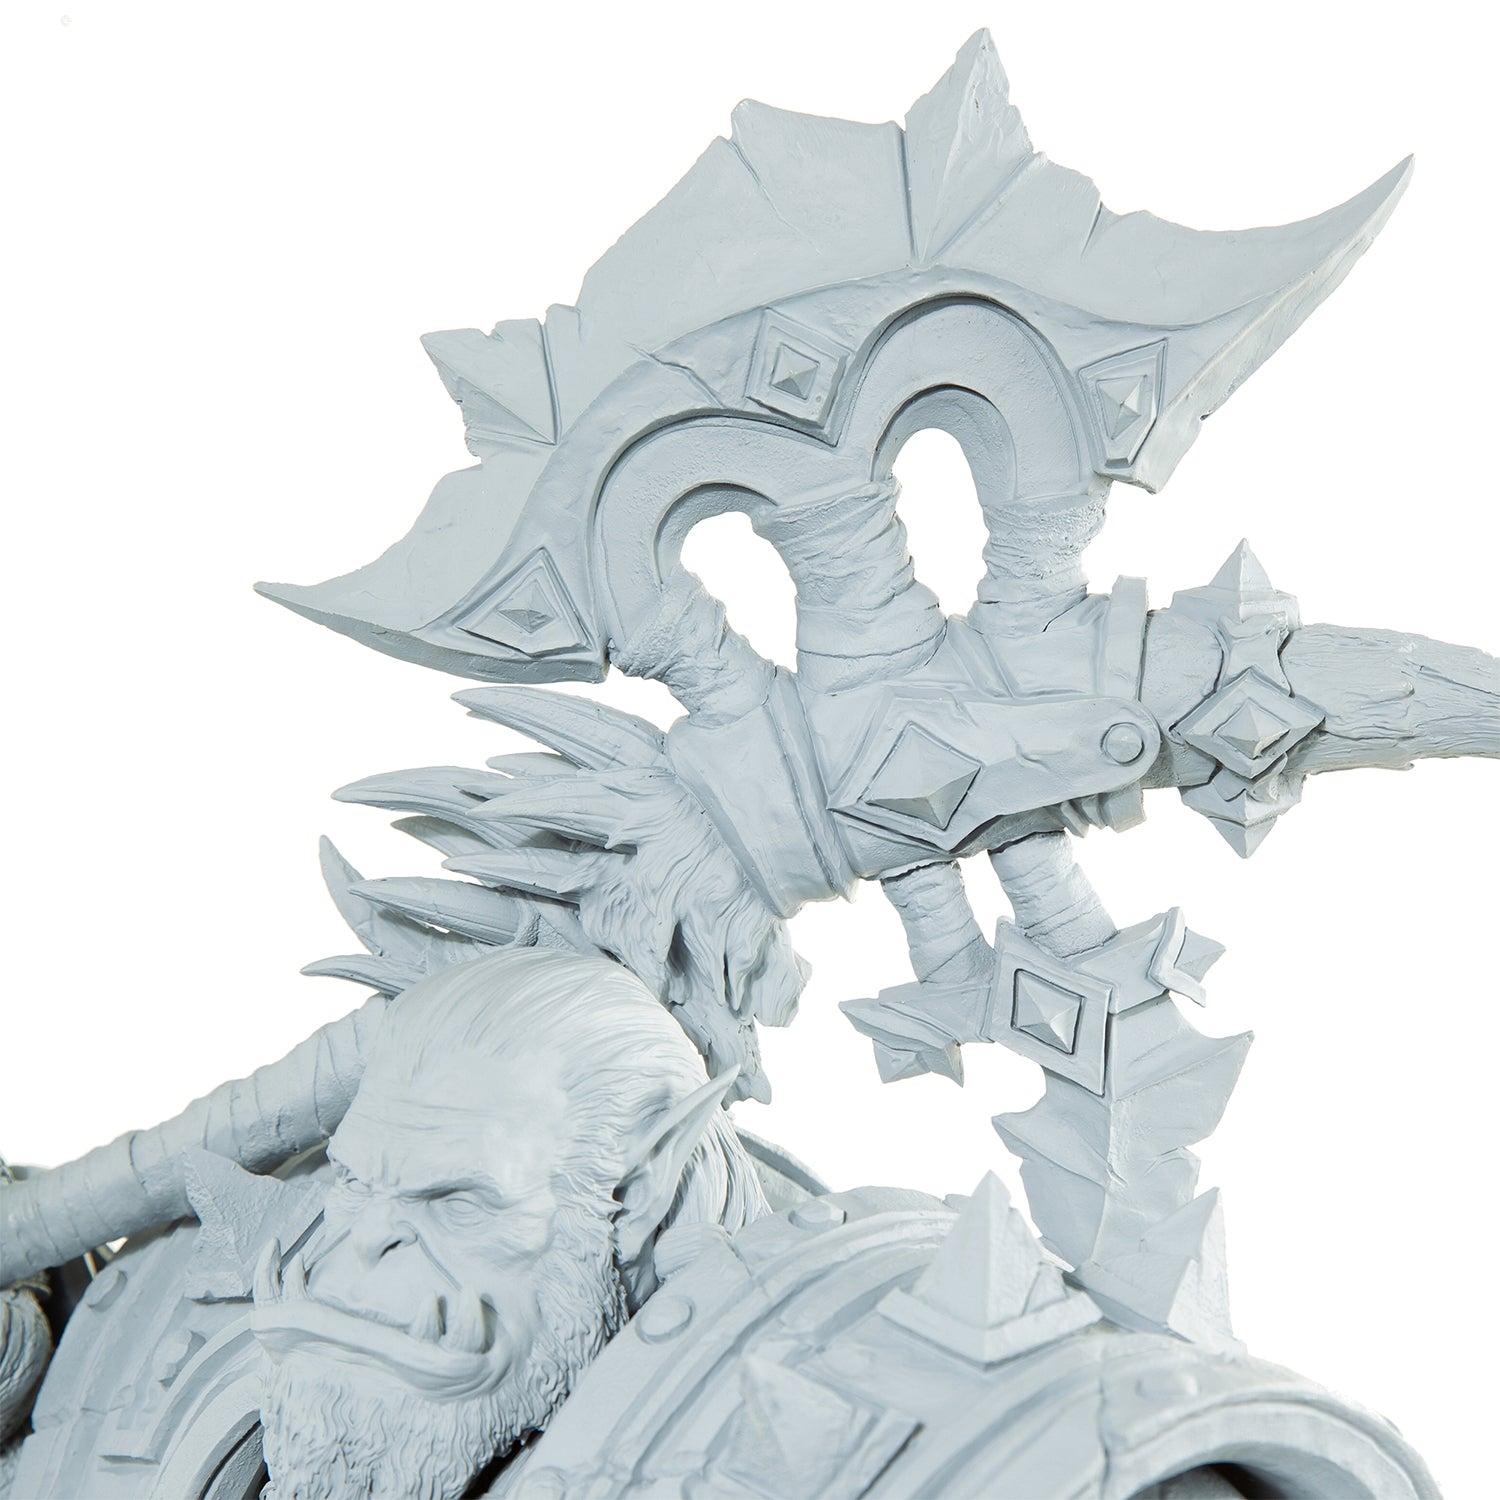 World of Warcraft Warchief Thrall 24" Limited Edition Statue in Grey - Zoom Head View